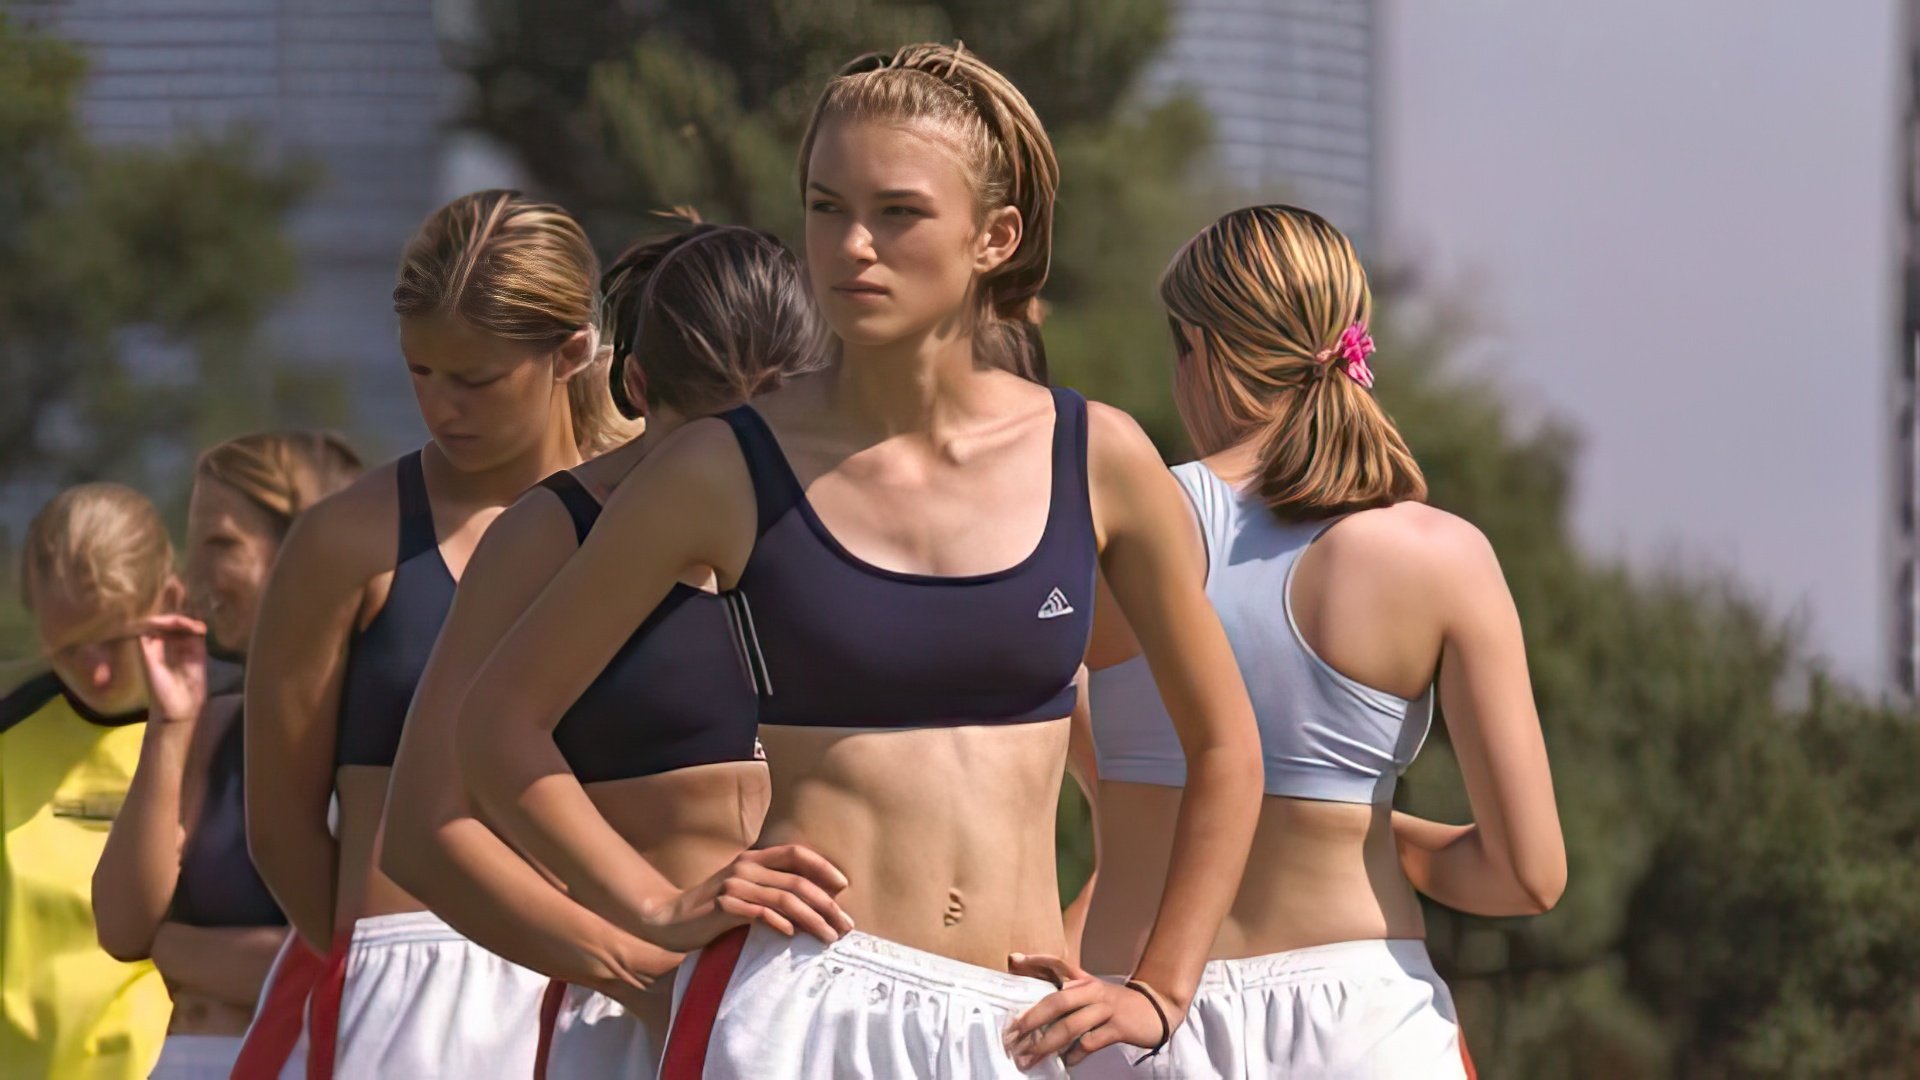 A snapshot from “Bend It Like Beckham”